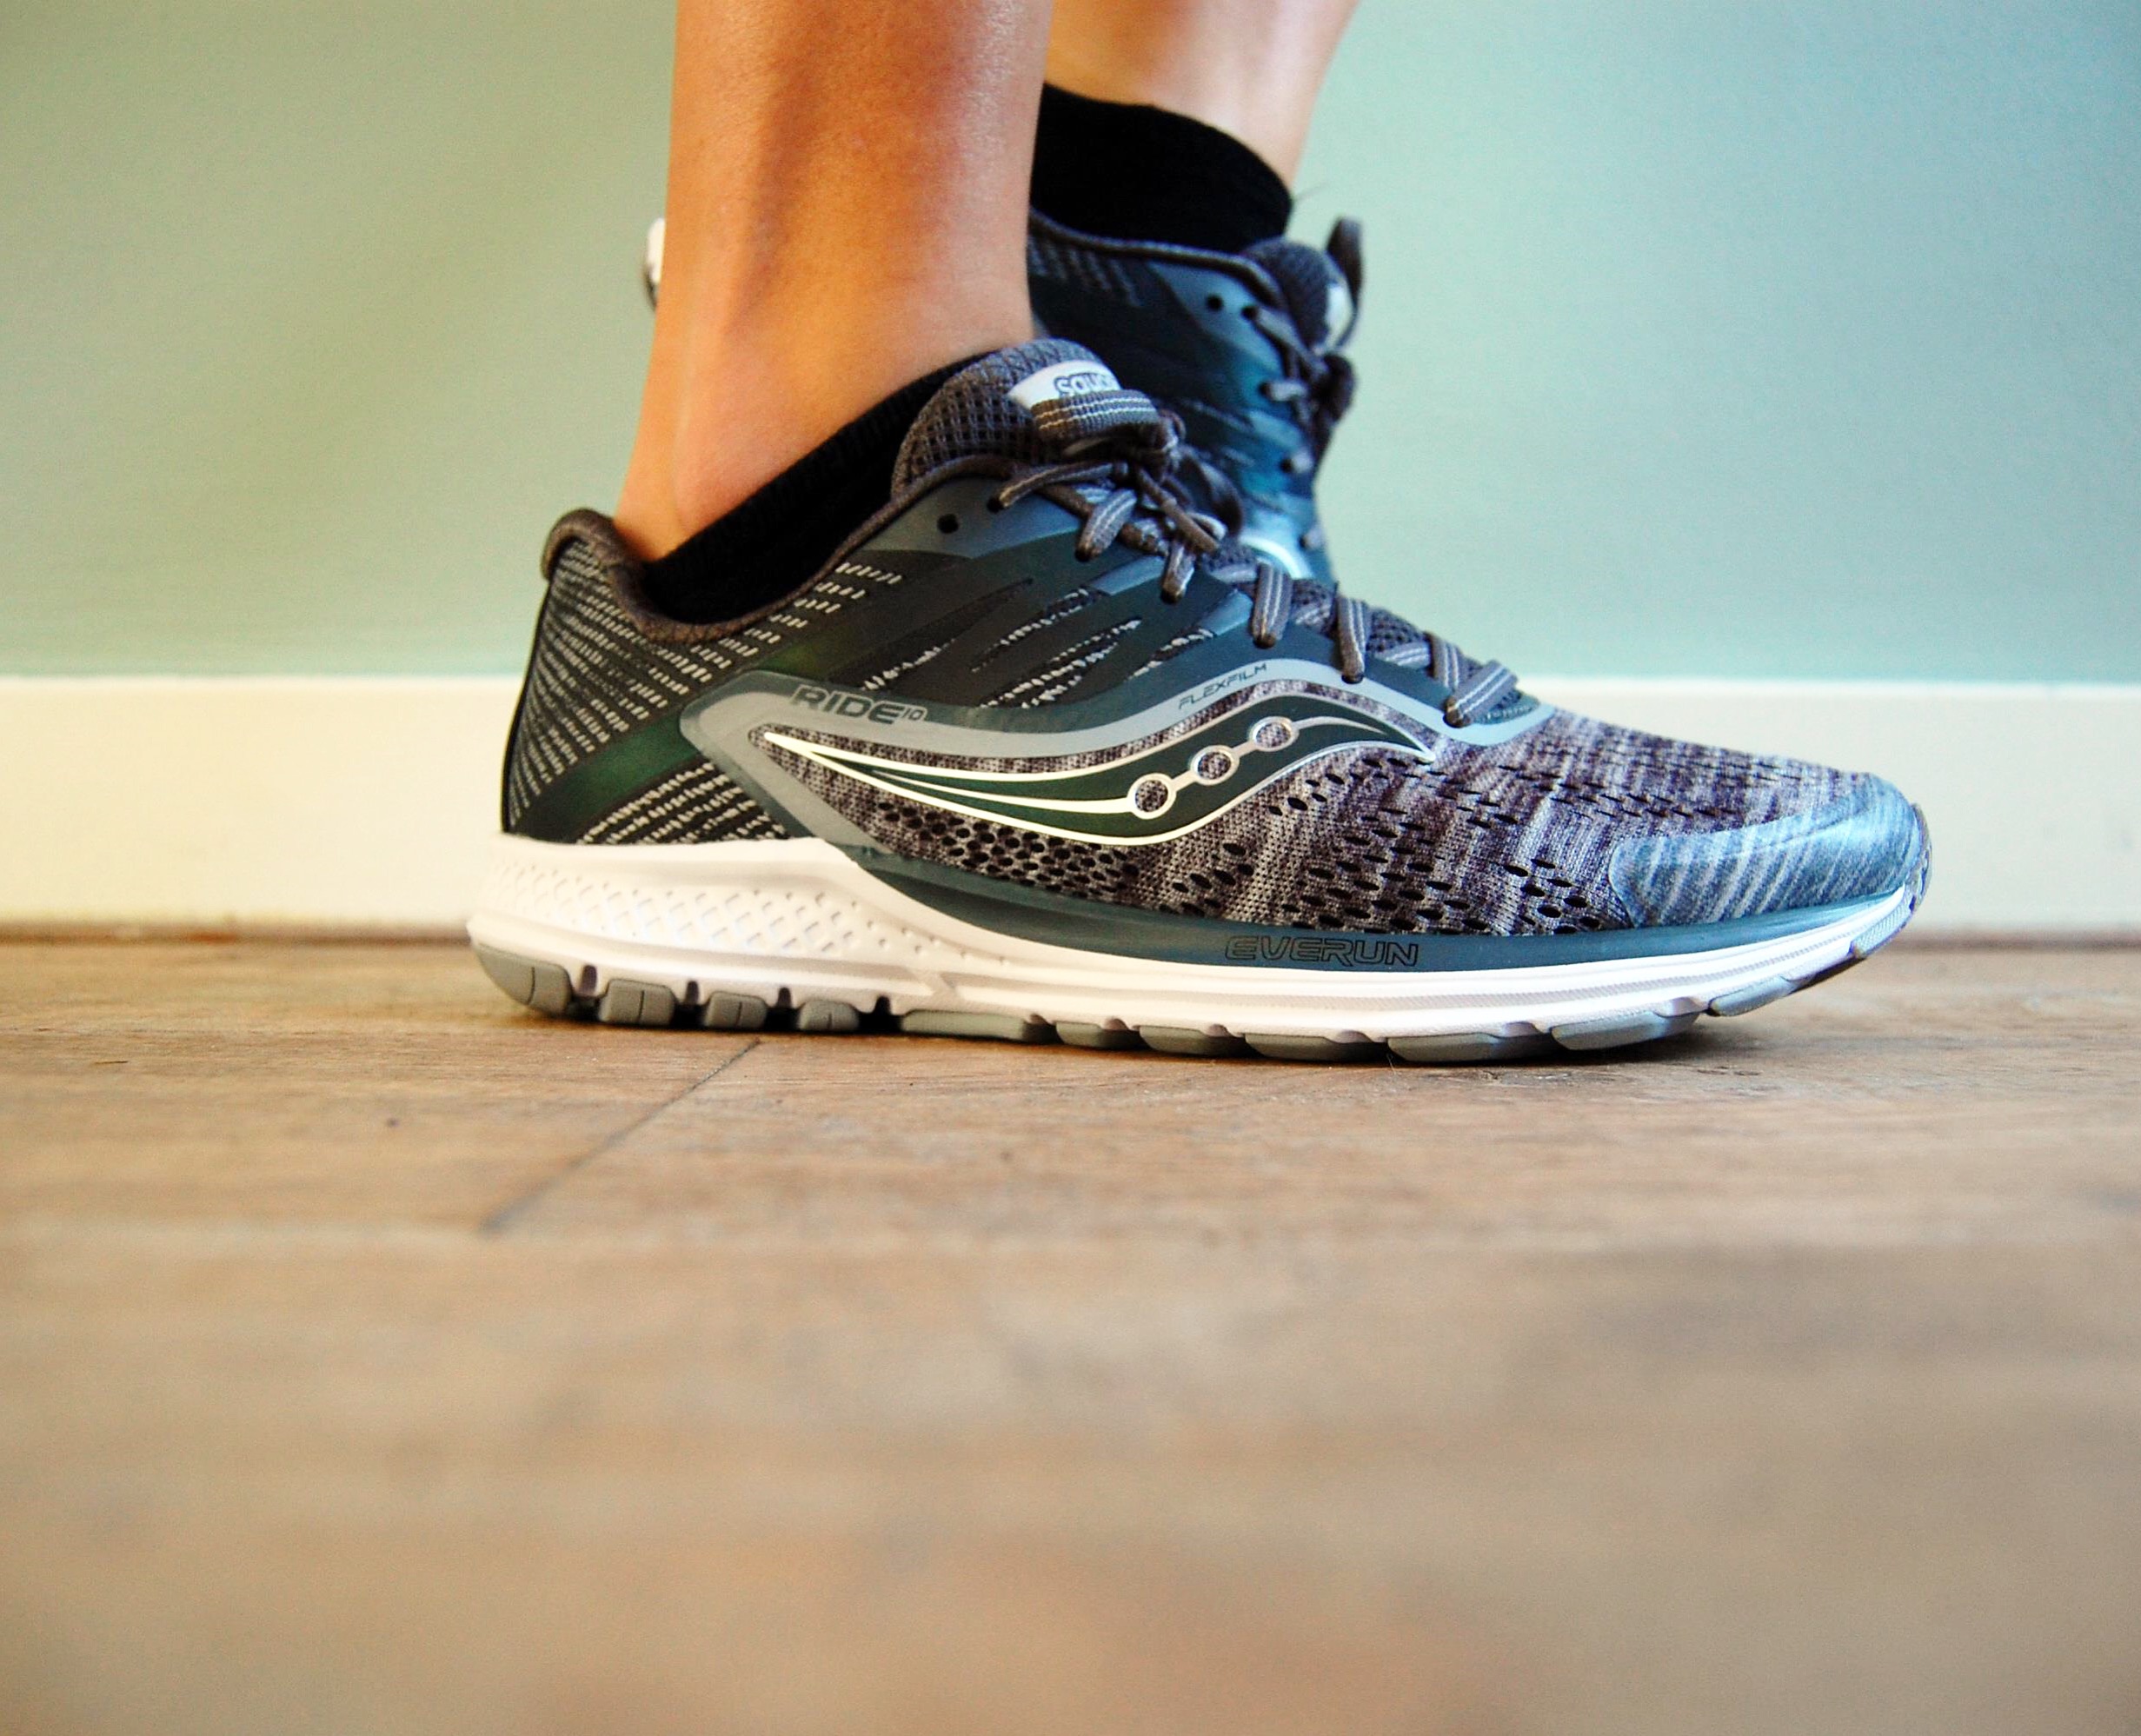 Review: Saucony Heathered Chroma Ride 